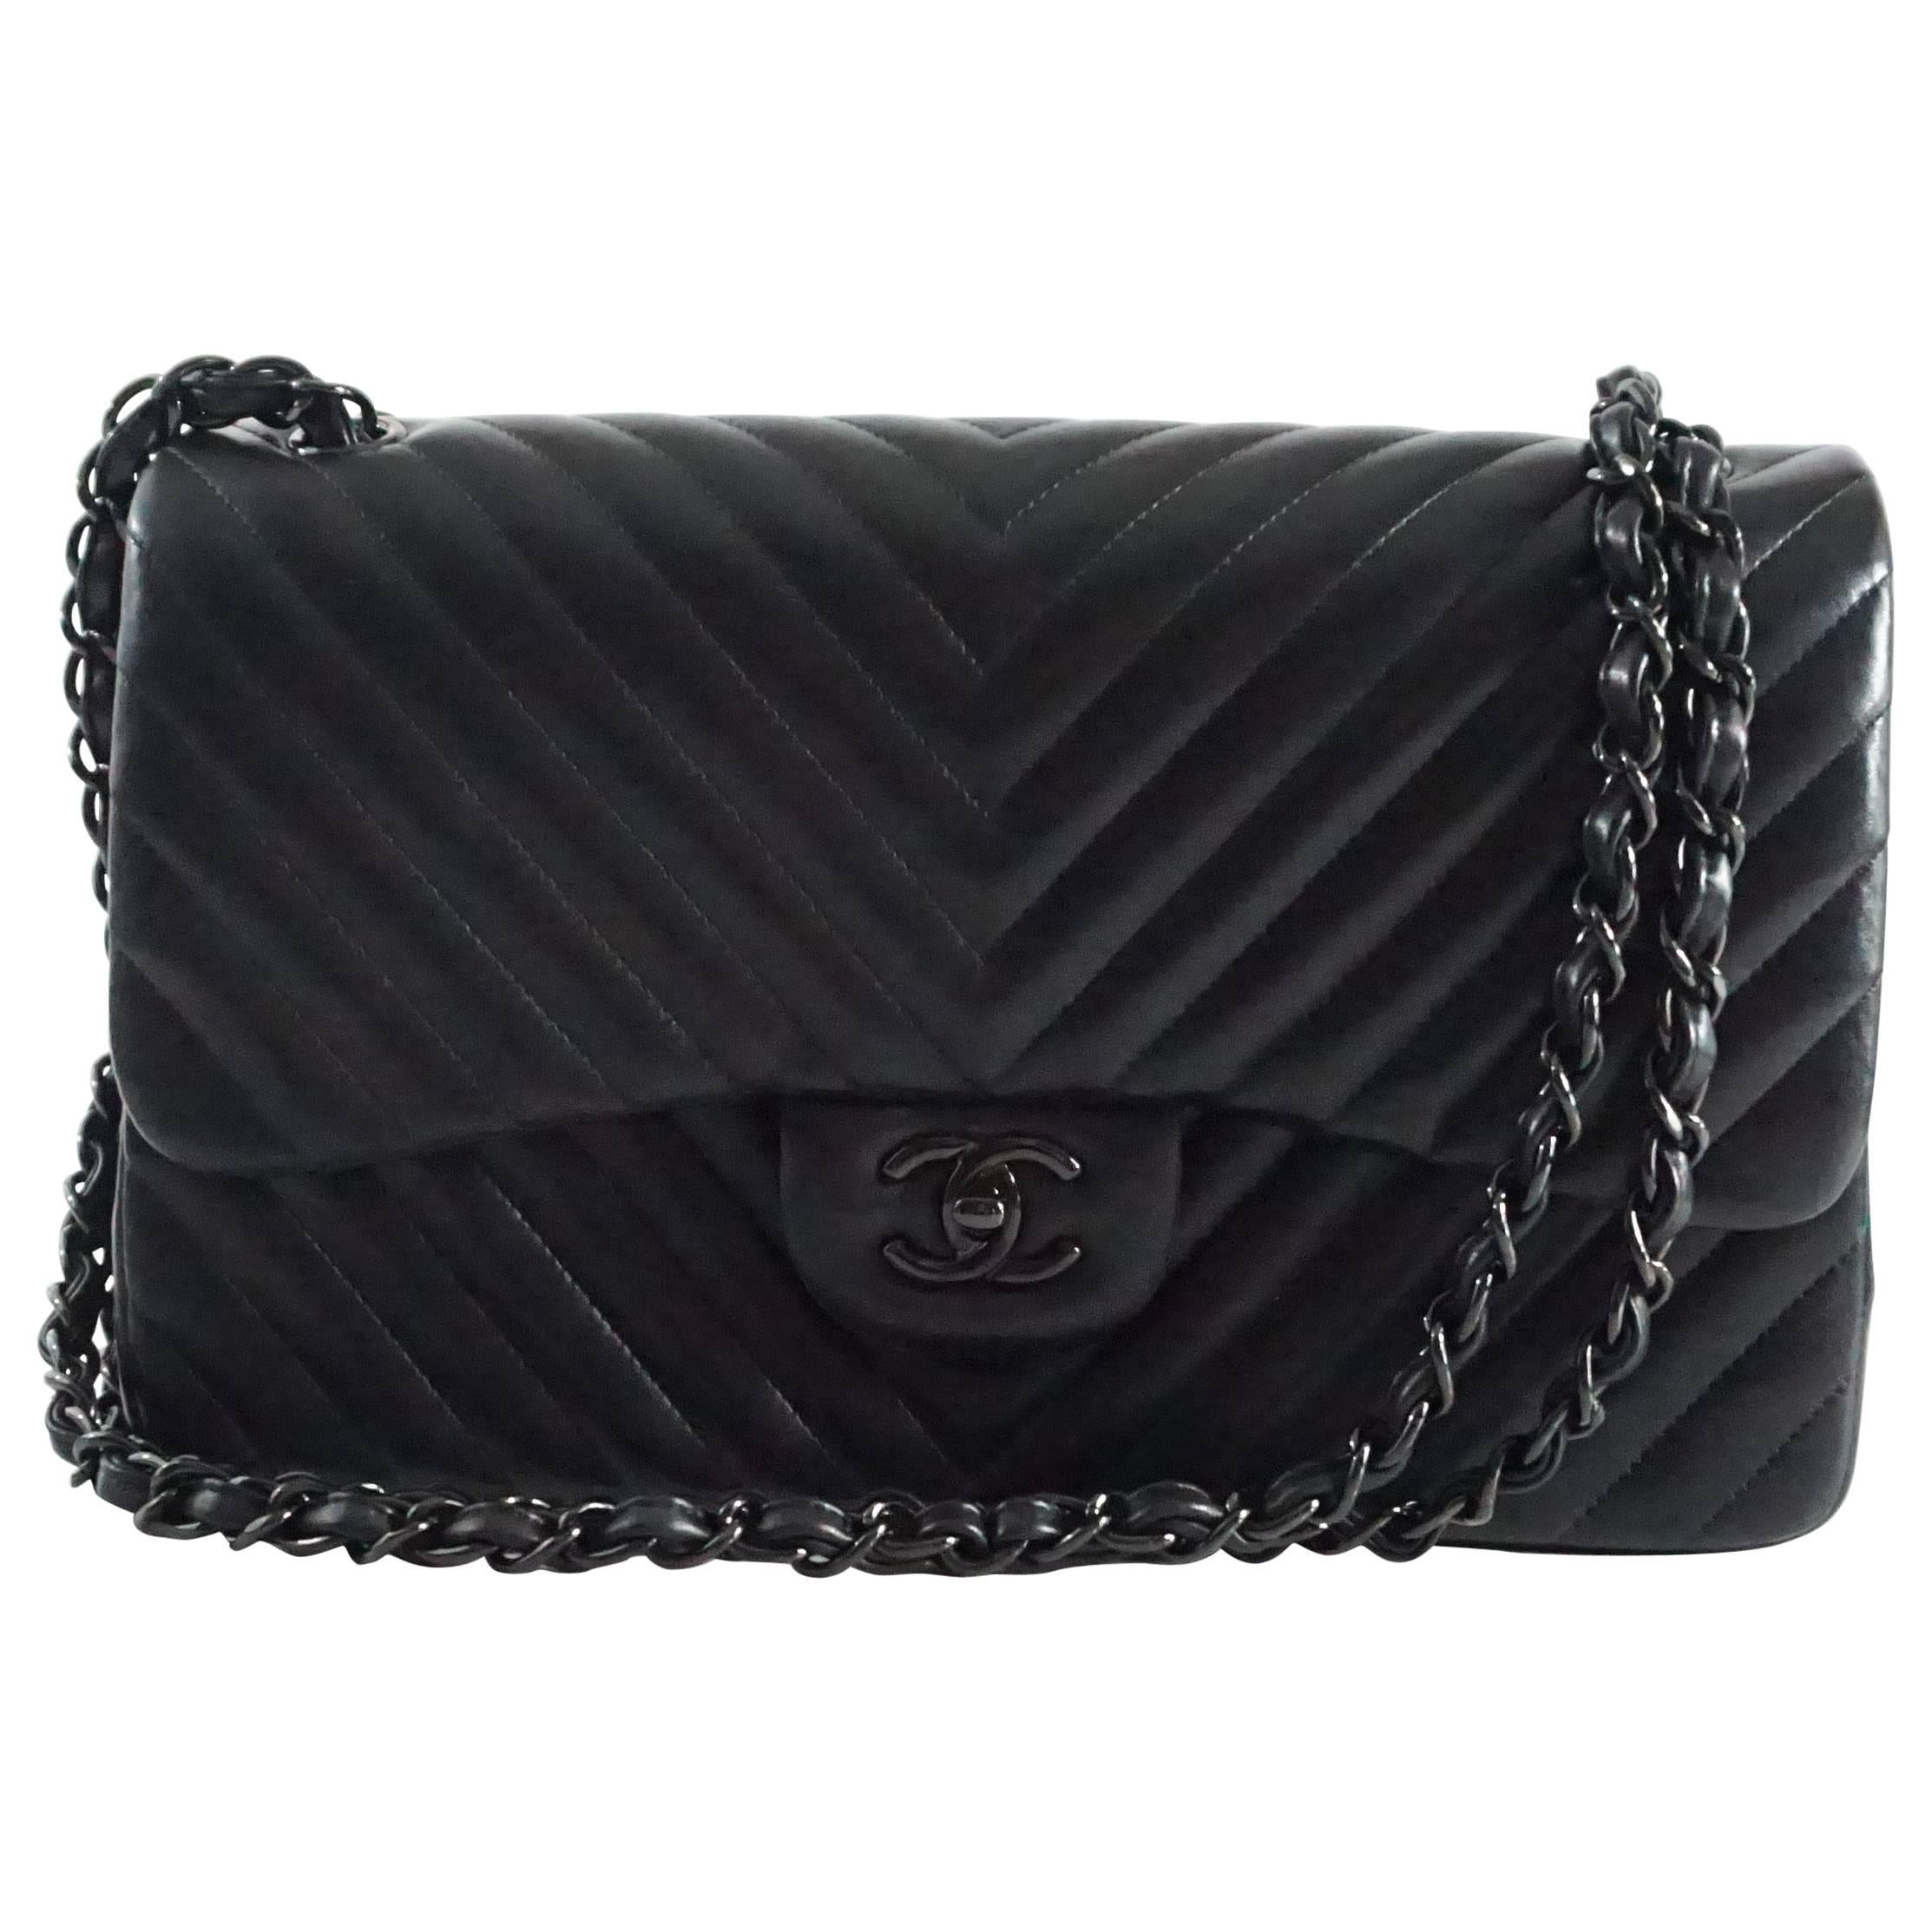 Chanel New Limited Edition So Black Chevon Jumbo Double Flap Bag - 2015/2016